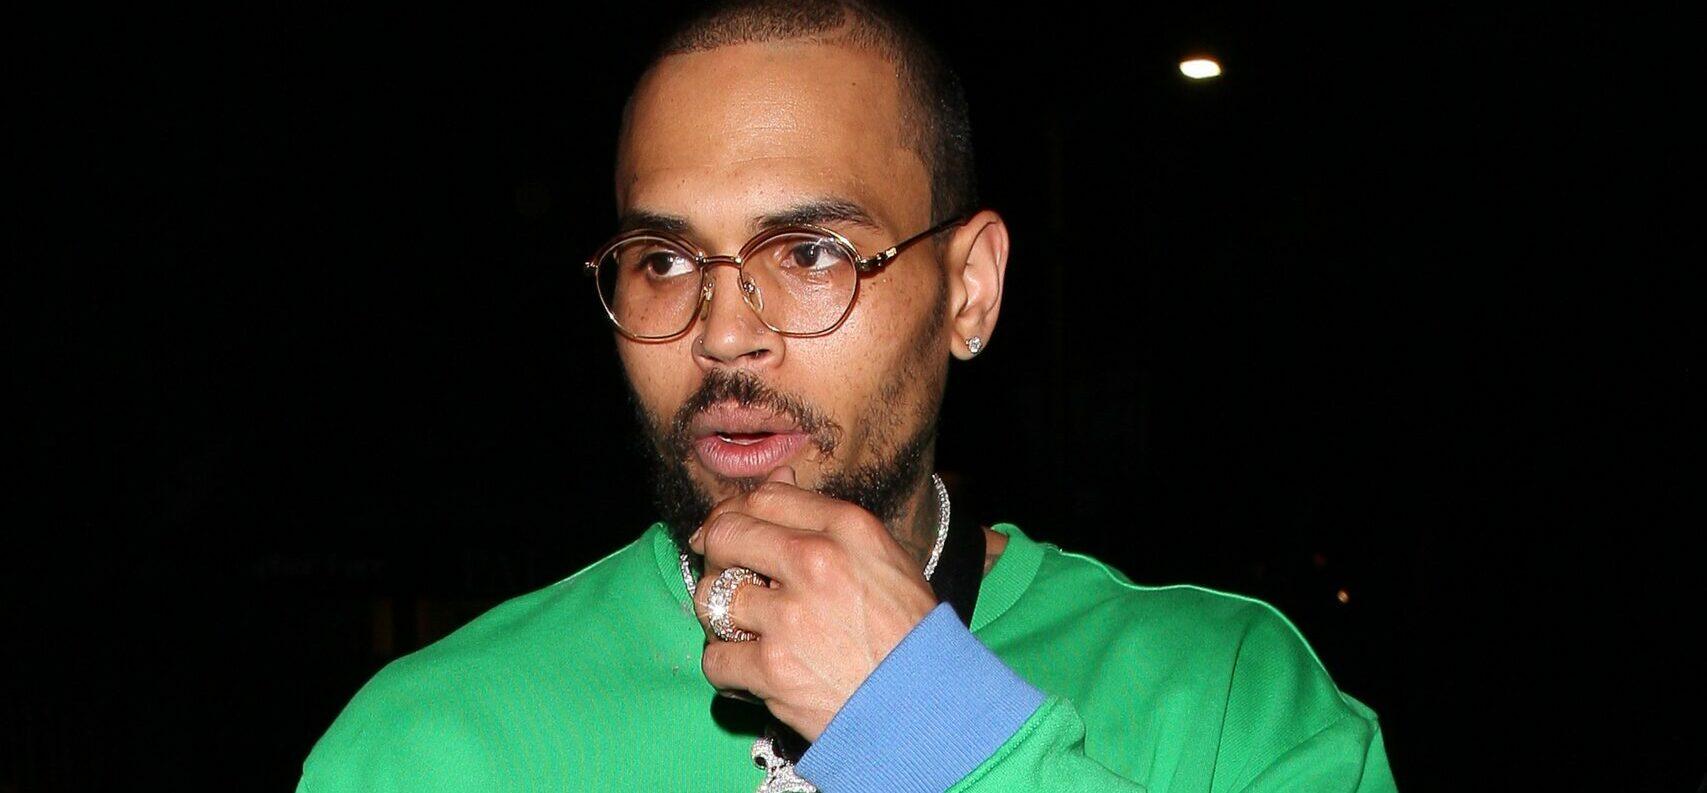 Chris Brown’s Alleged Dog Bite Victim’s Family Seeking Over $1 MILLION In Damages